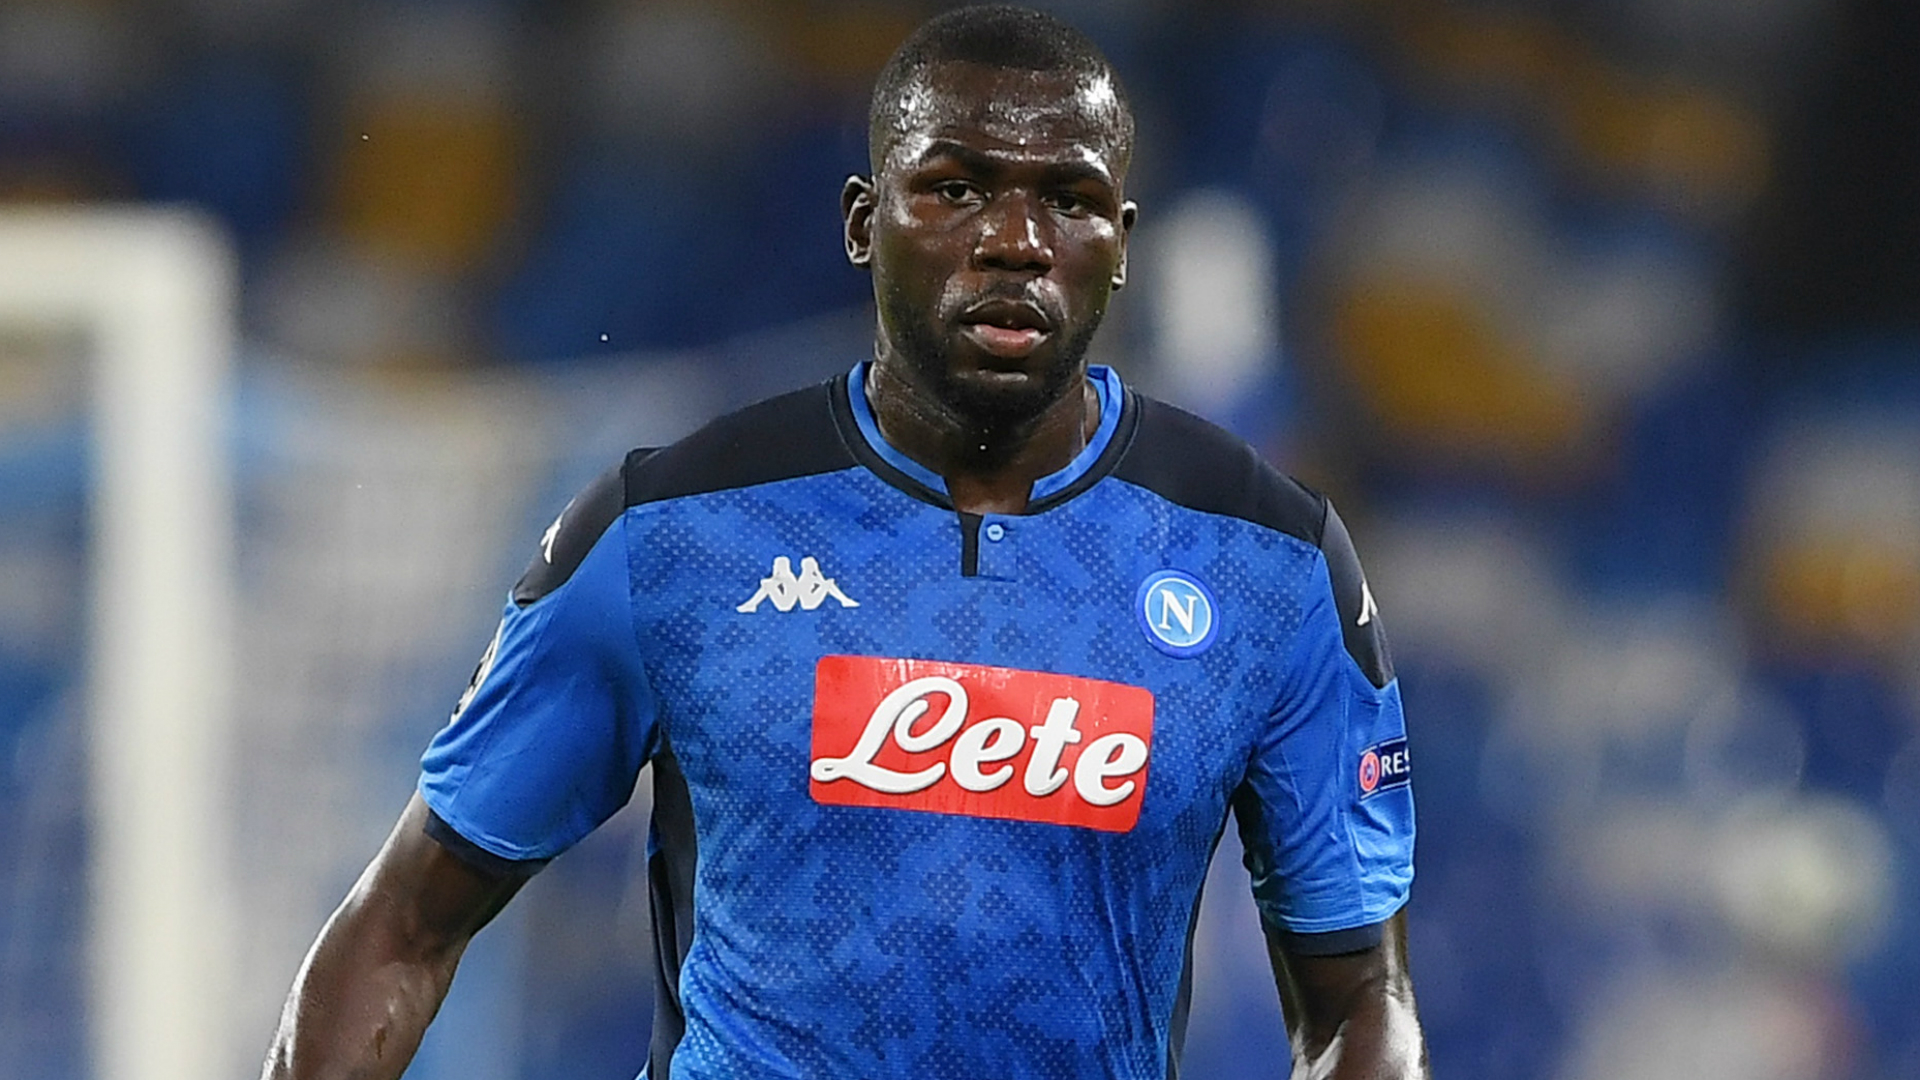 It will reportedly take a big offer for Napoli to part with centre-back Kalidou Koulibaly.